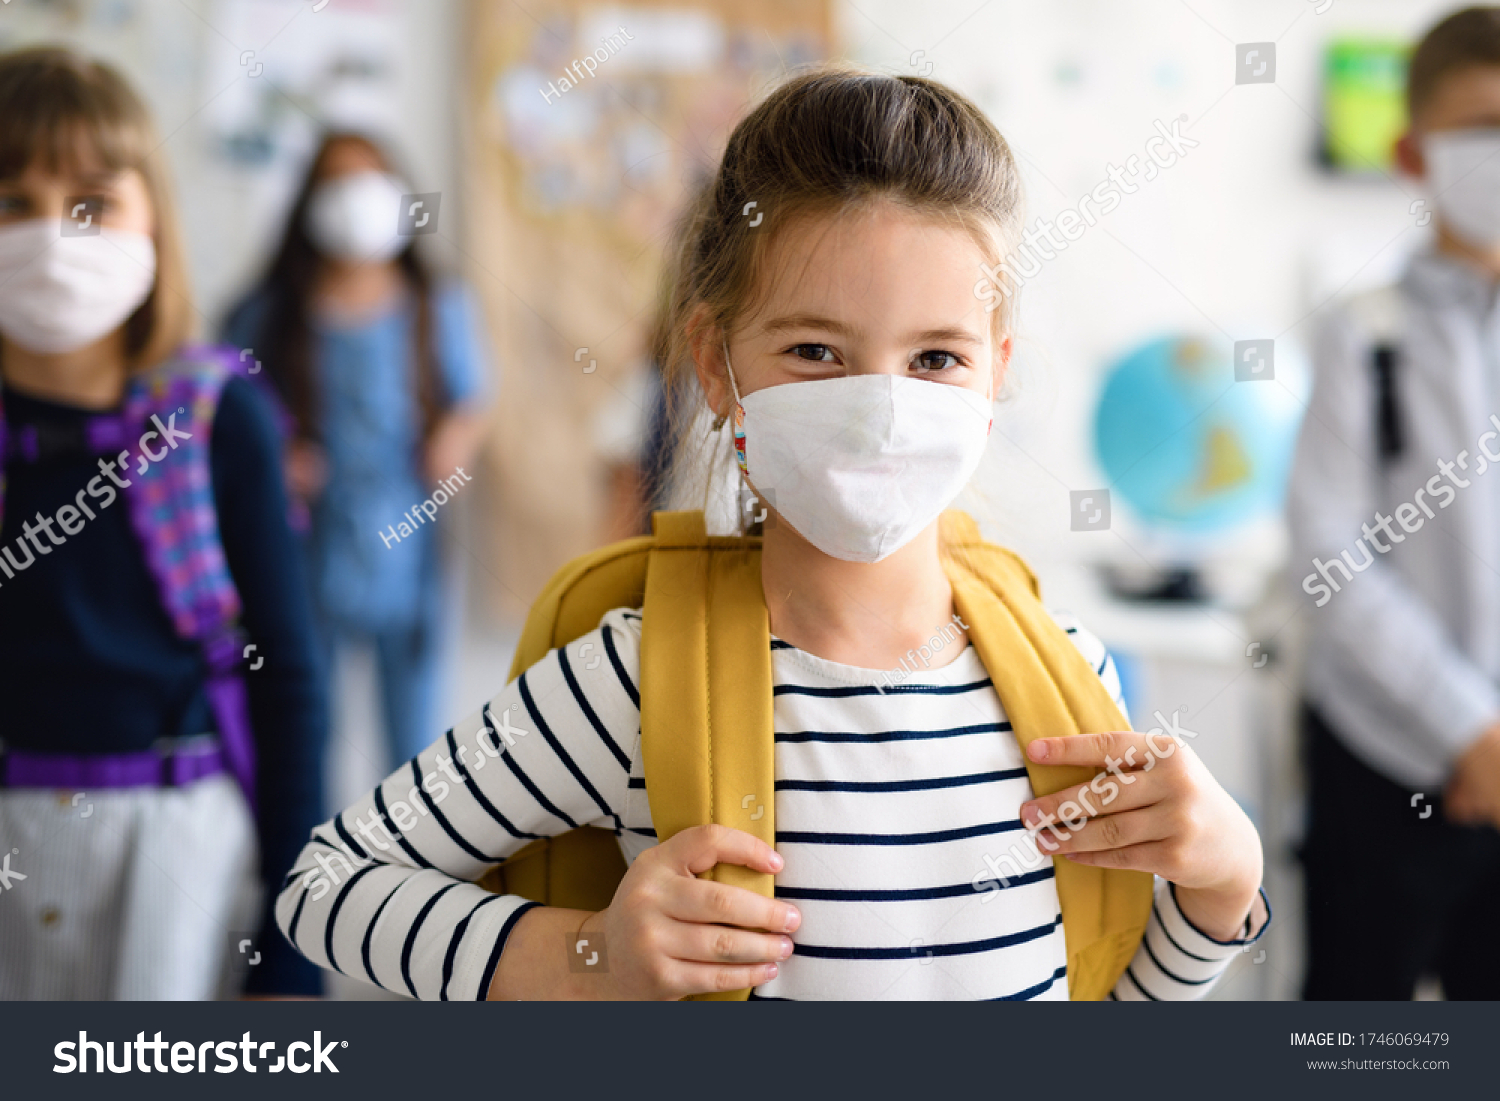 Child with face mask going back to school after covid-19 quarantine and lockdown. #1746069479